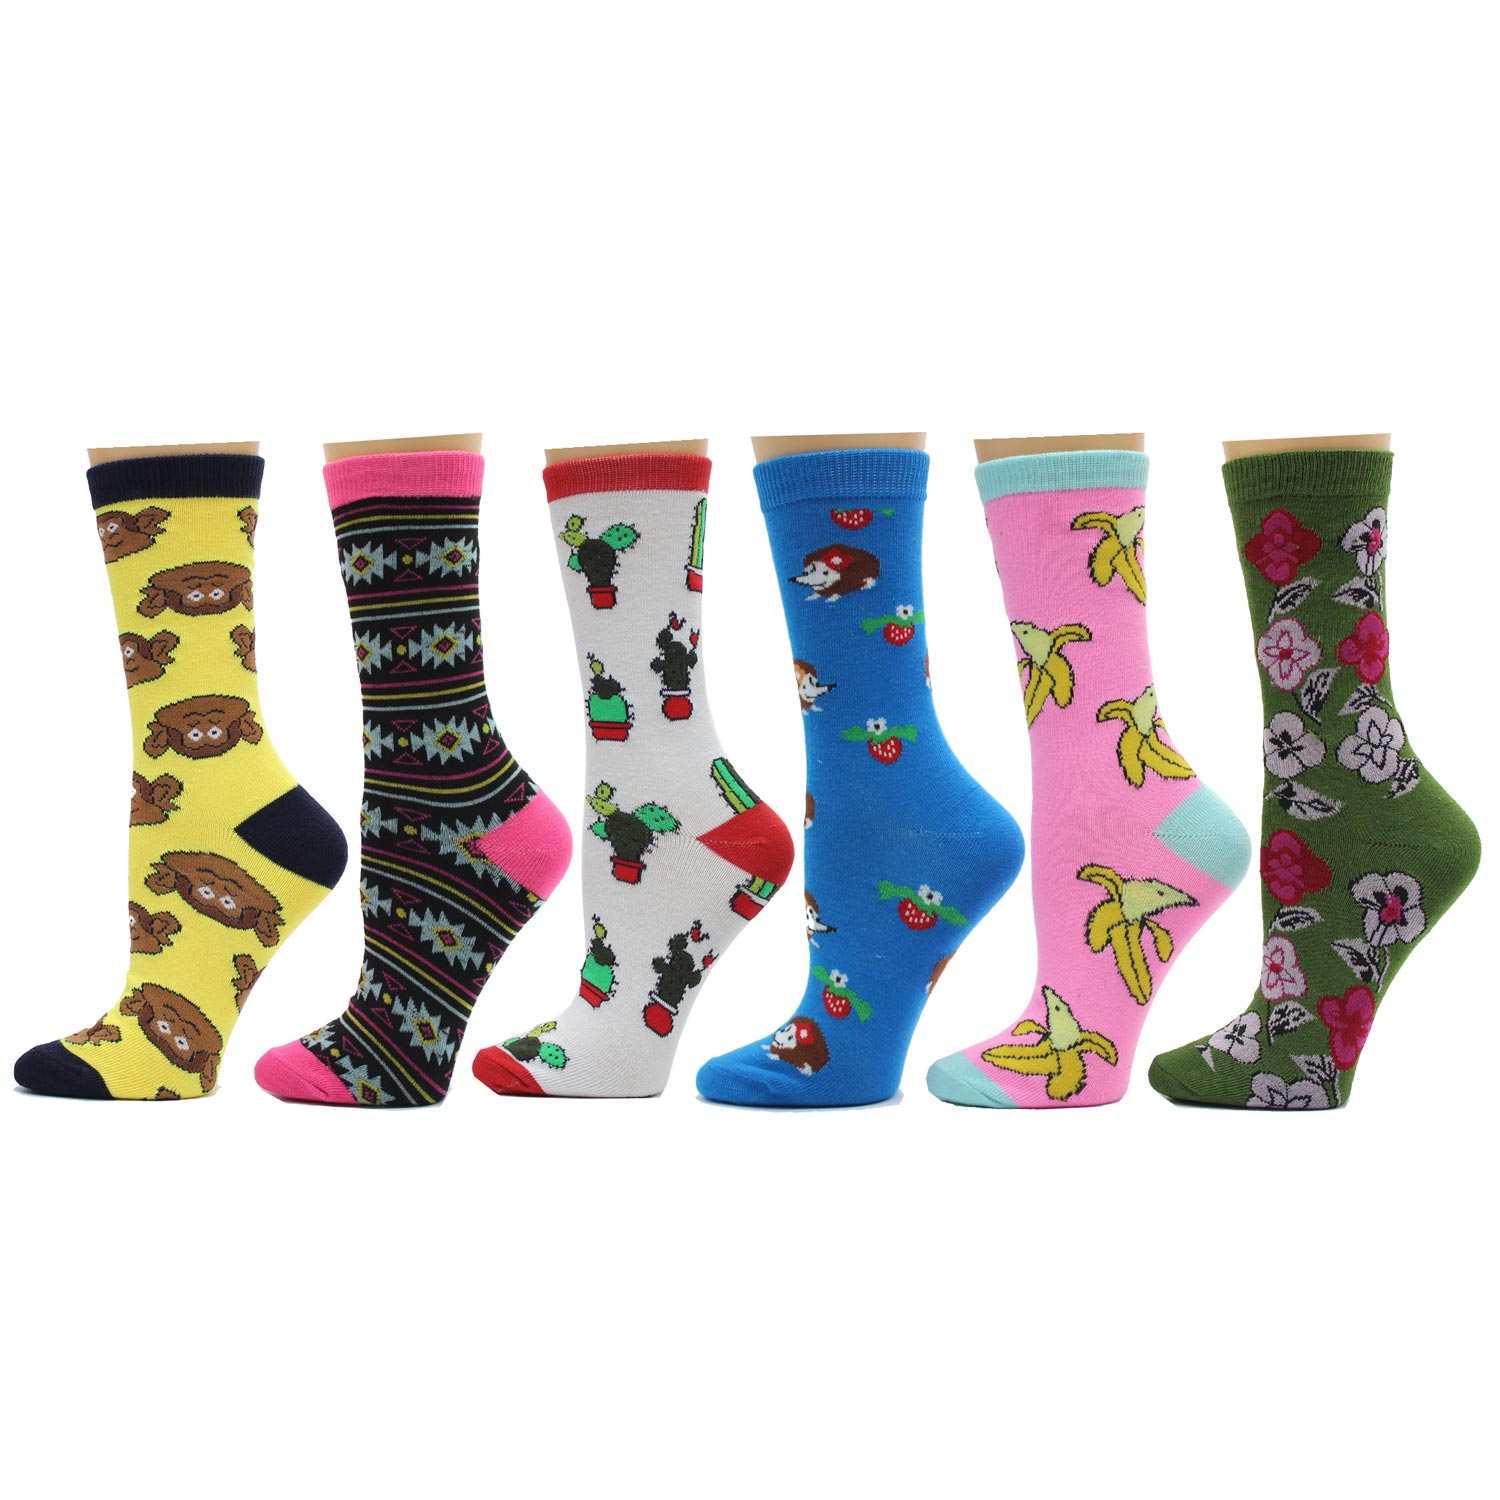 12 Pack Women's Colorful Patterned Socks